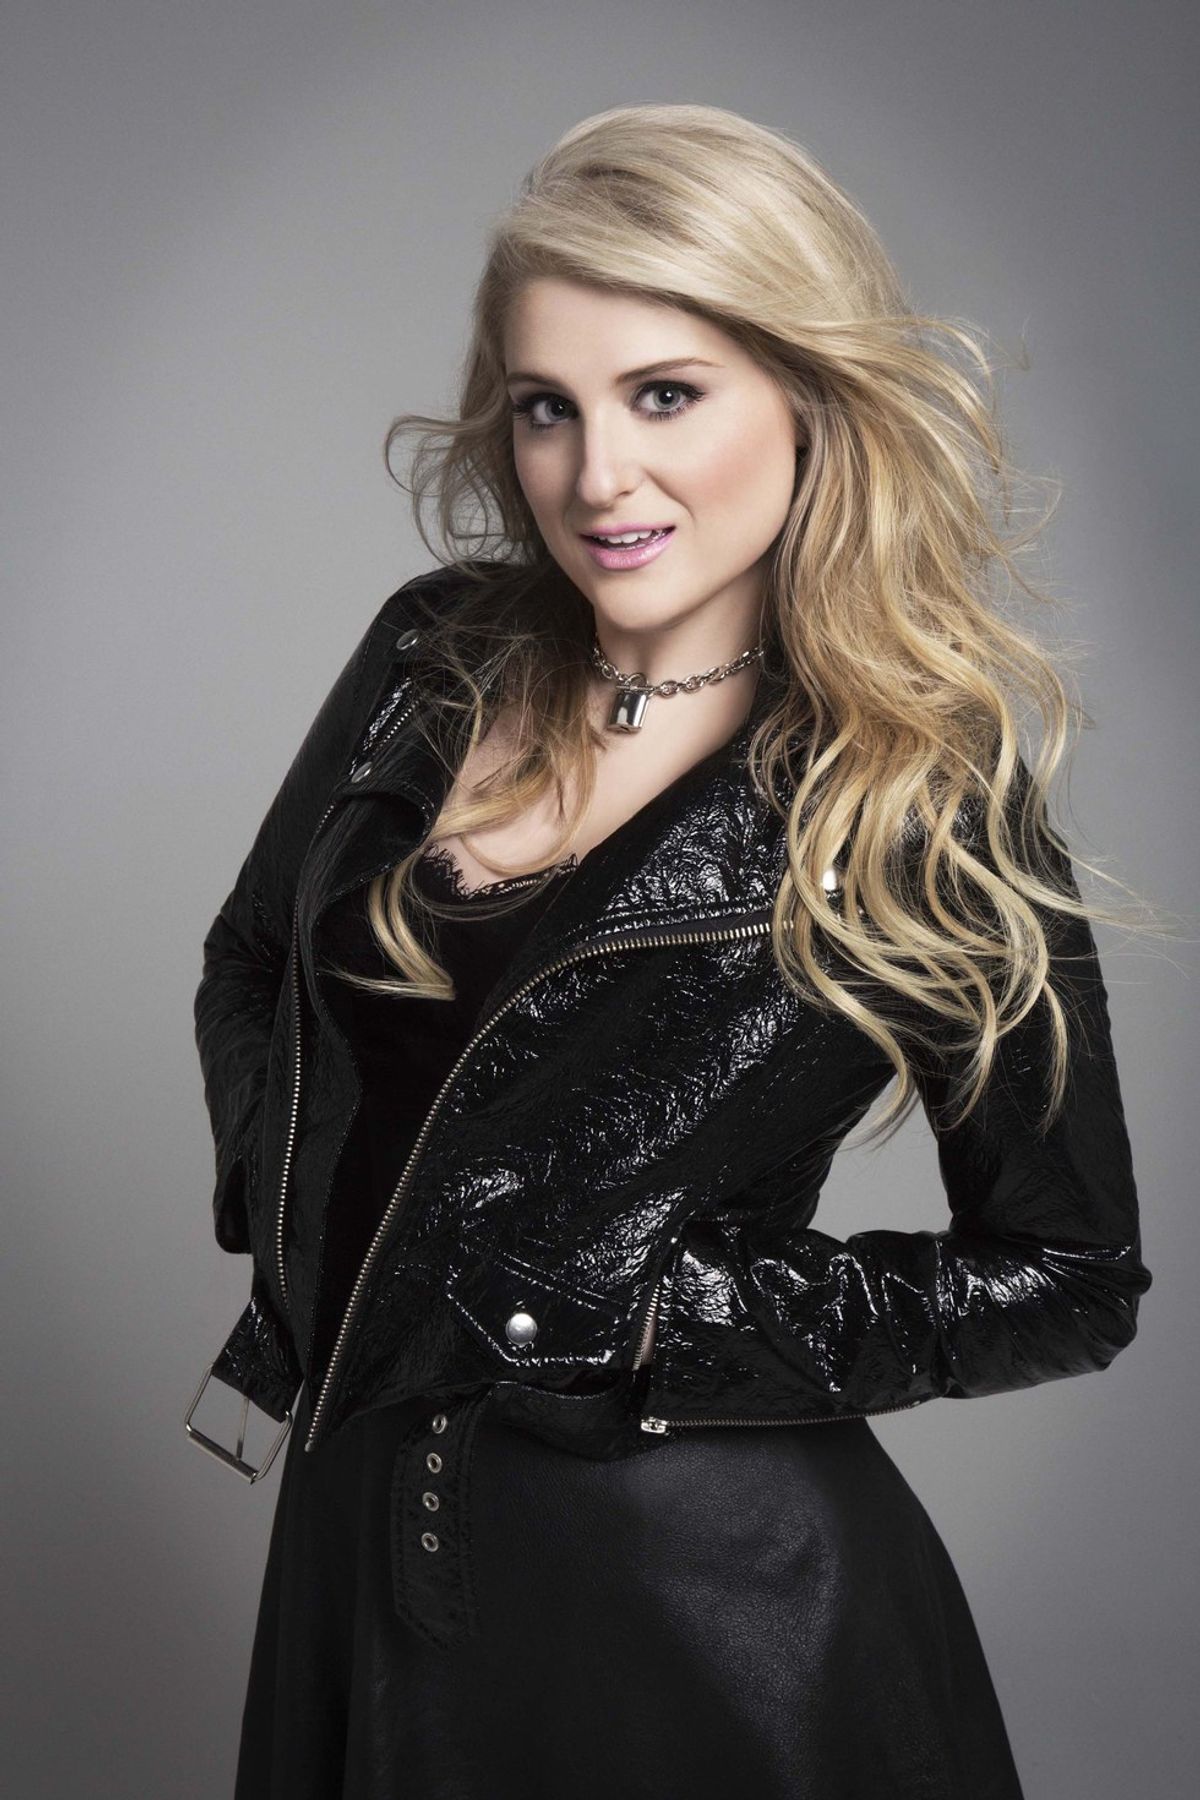 11 Amazing Things Meghan Trainor Taught Us About Relationships